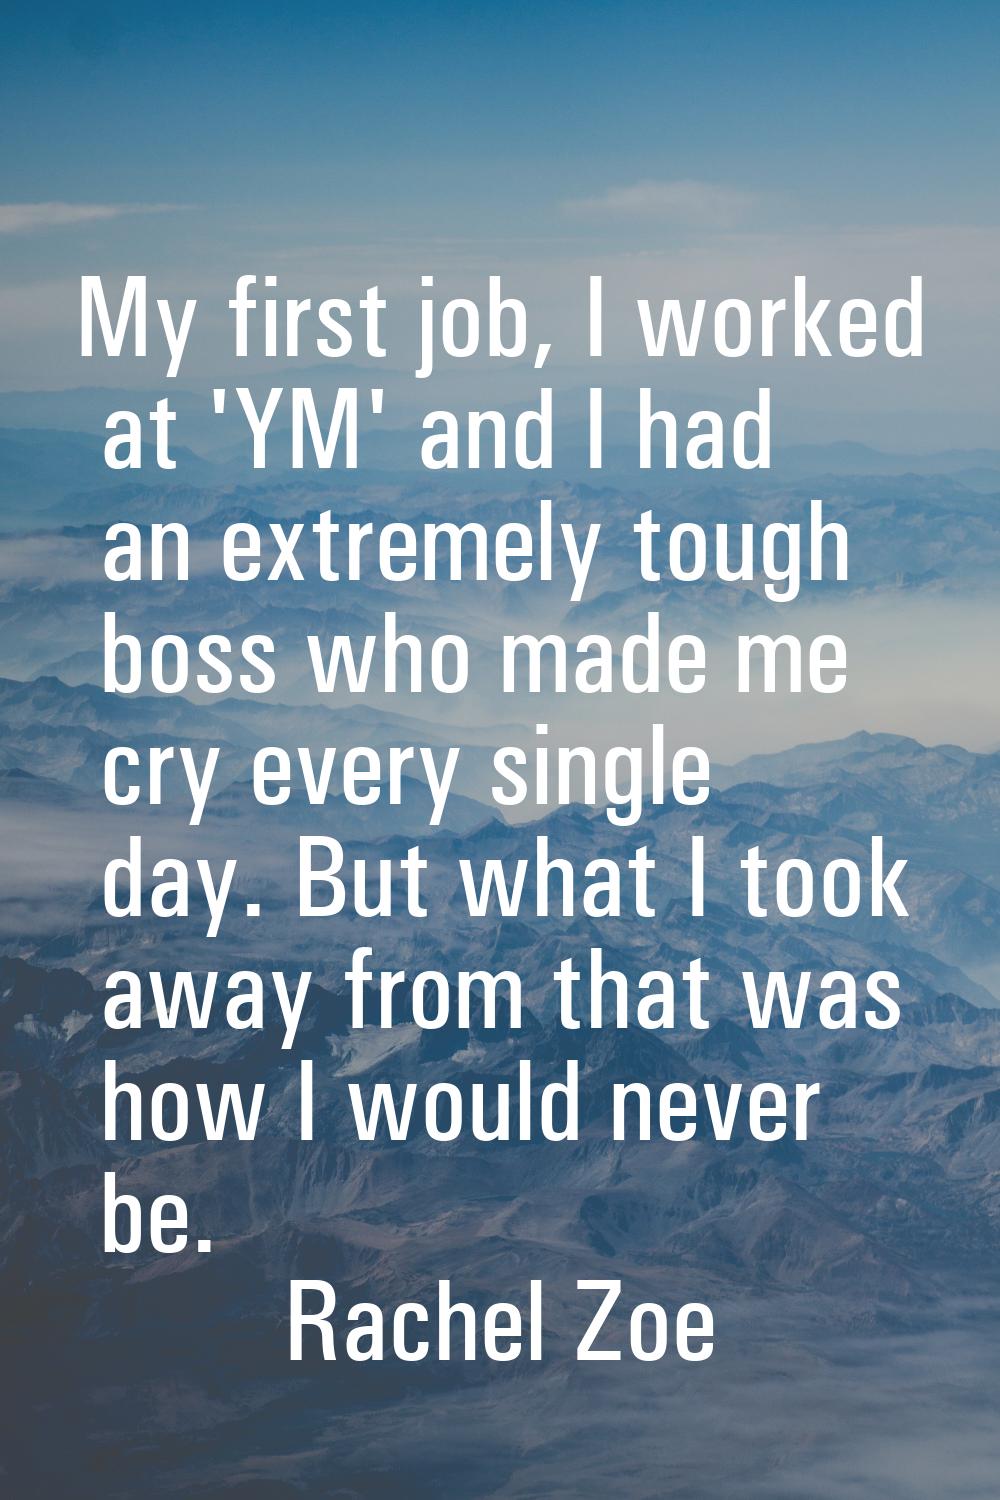 My first job, I worked at 'YM' and I had an extremely tough boss who made me cry every single day. 